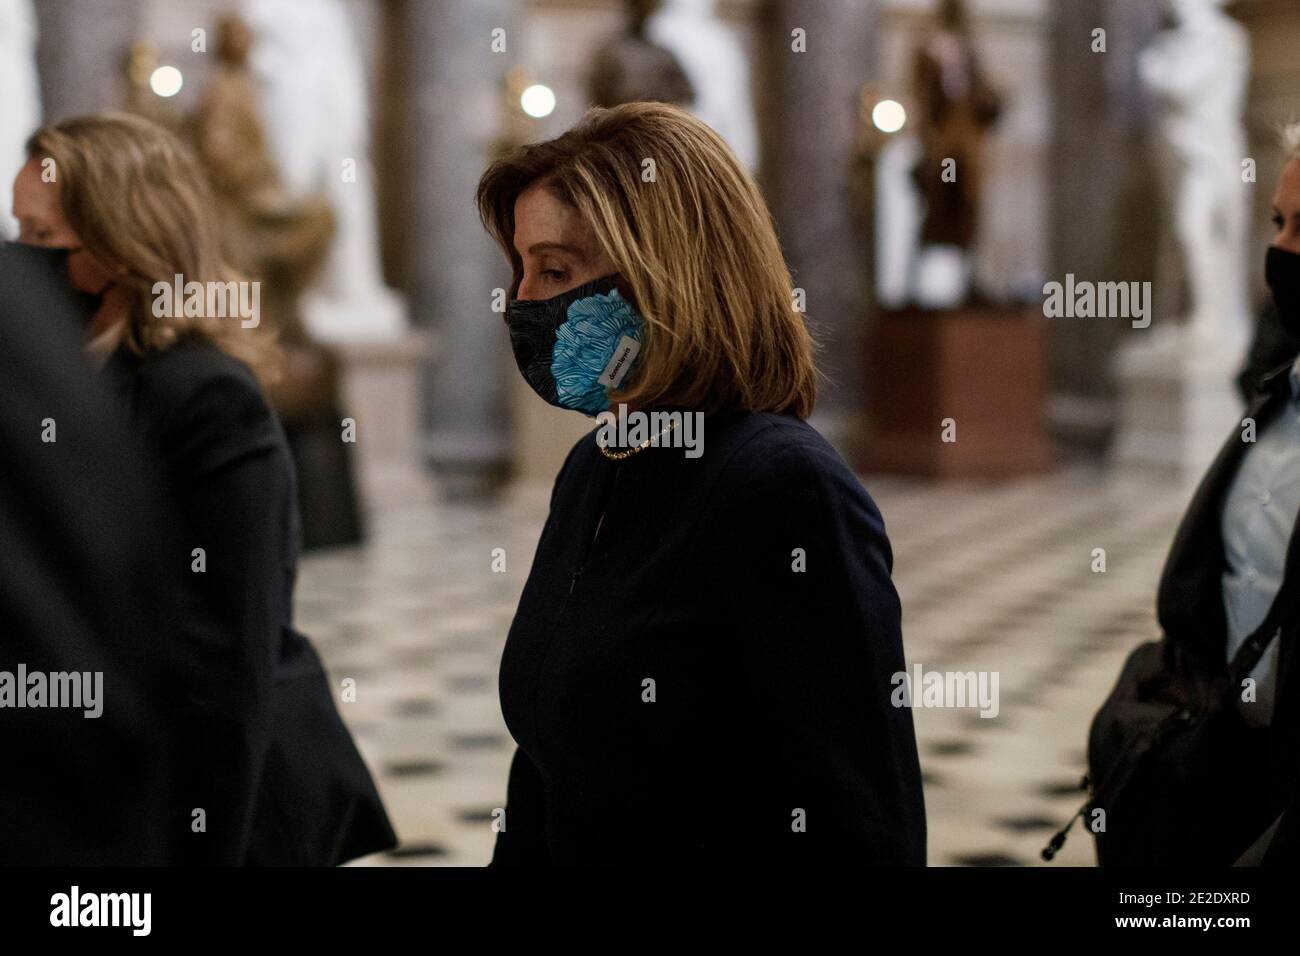 Washington, USA. 13th Jan, 2021. U.S. House Speaker Nancy Pelosi wearing a protective mask walks through the hallways in Capitol Building in Washington, DC, the United States, Jan. 13, 2021. A majority of lawmakers in the U.S. House on Wednesday voted for impeaching President Donald Trump over 'incitement of insurrection,' making him the first president to be impeached twice. Credit: Ting Shen/Xinhua/Alamy Live News Stock Photo